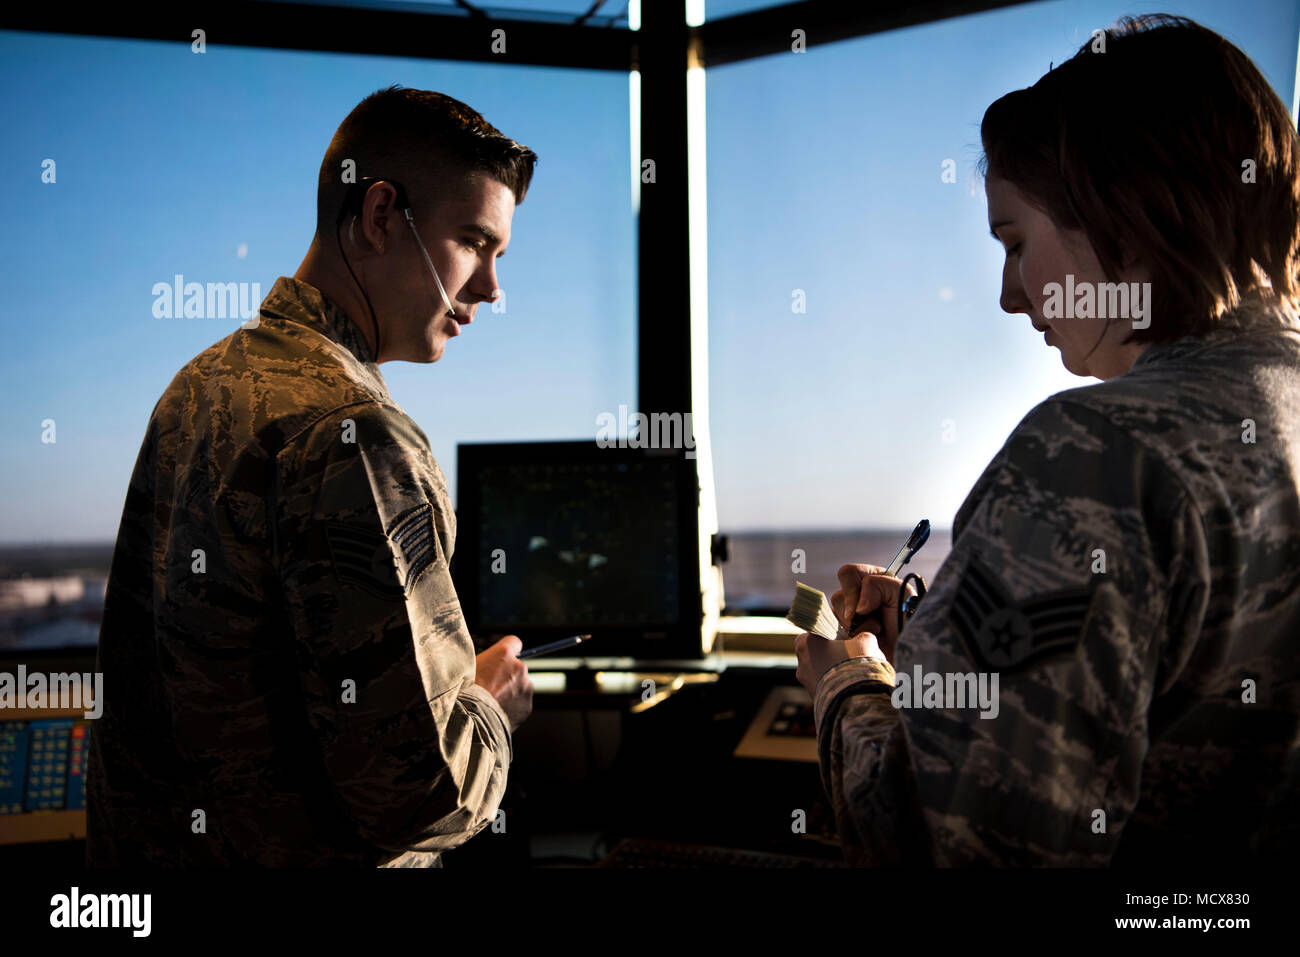 Vance air traffic controllers manage the airspace from Inhofe Air Traffic Control Tower, March 1, 2017, at Vance Air Force Base, Okla. Although Vance may be known as a pilot training base, it's also one of the leaders in training and certifying Air Force air traffic controllers. (U.S. Air Force photo by Airman Zachary Heal) Stock Photo